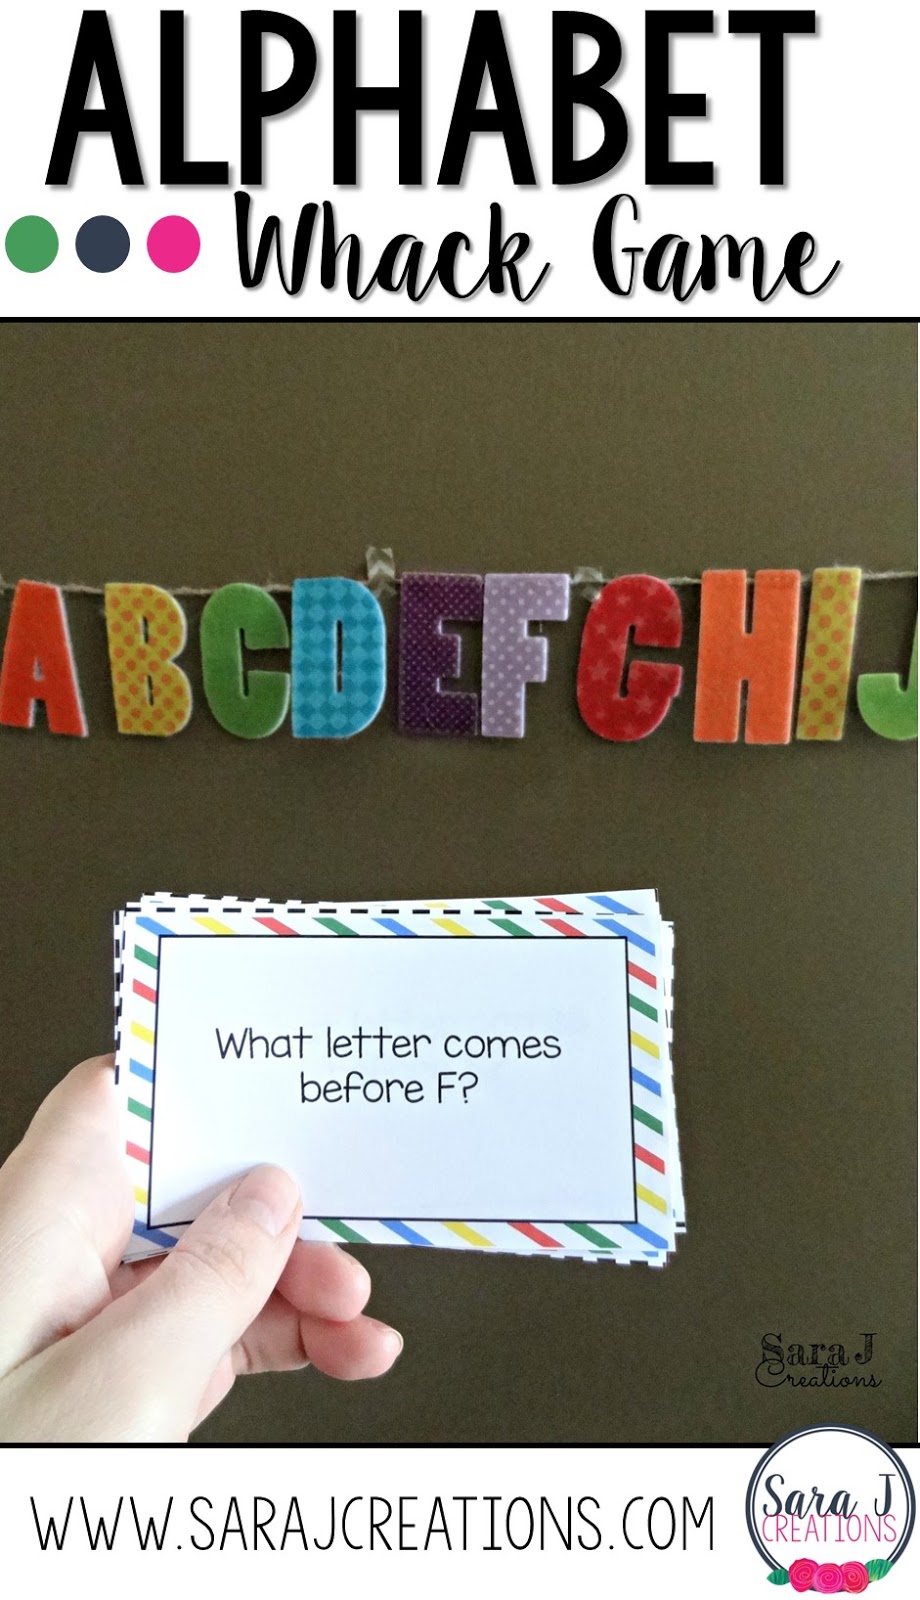 Free alphabet letter practice game with printable question prompts